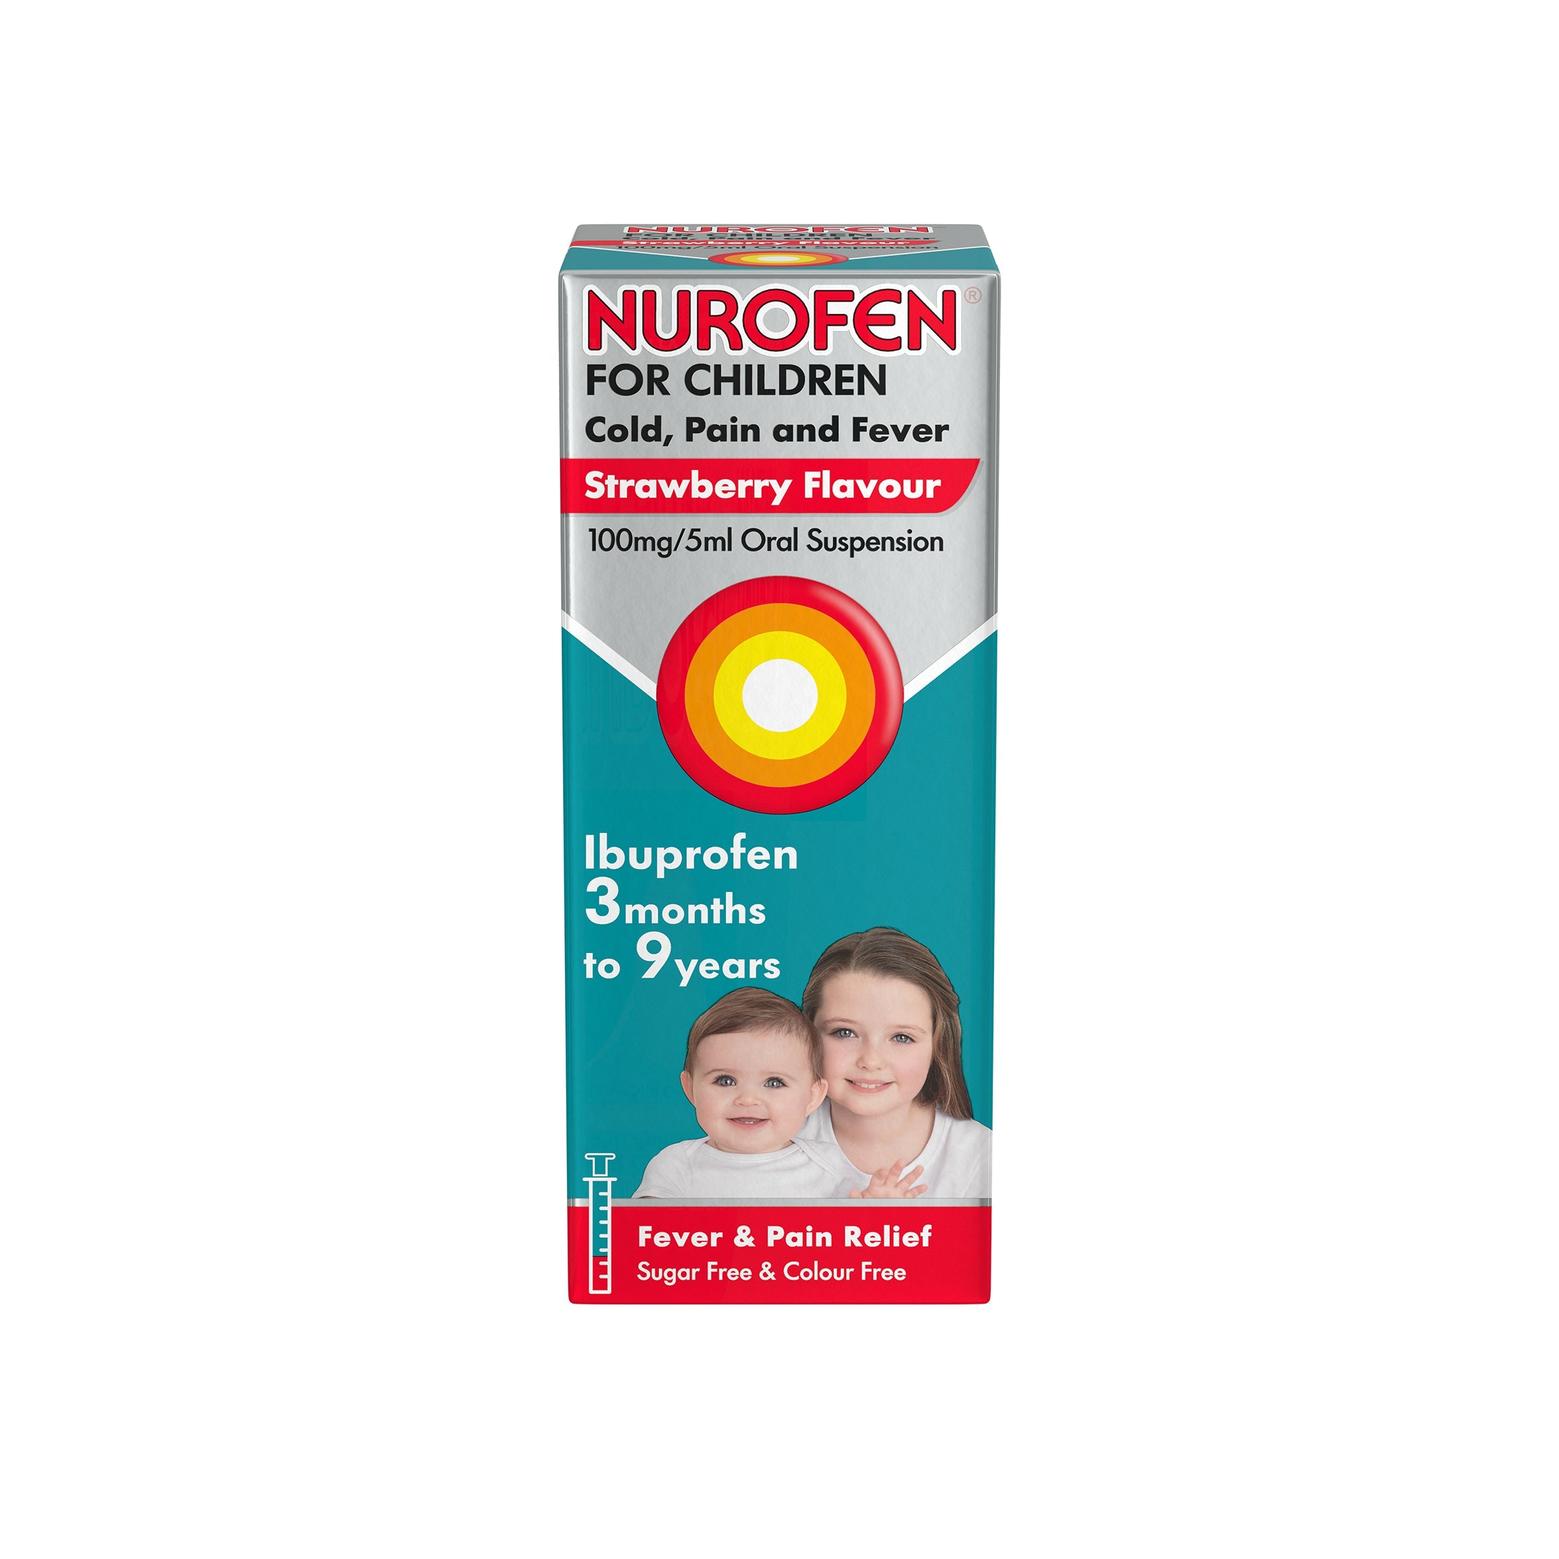 Nurofen for children fever and pain relief offers at £399 in Lloyds Pharmacy